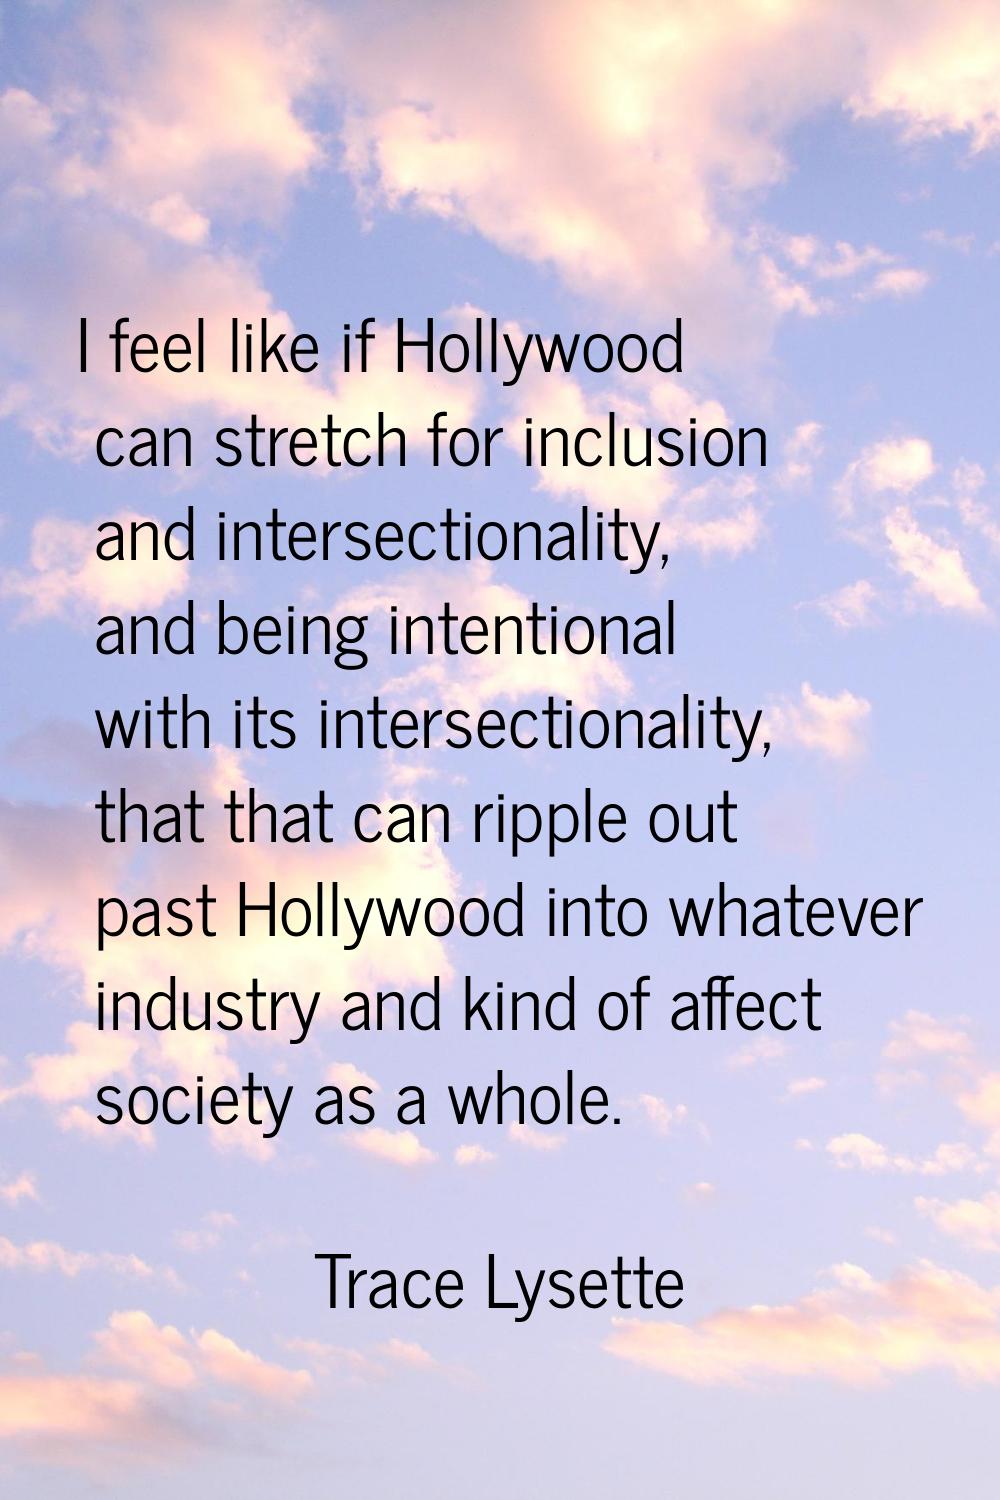 I feel like if Hollywood can stretch for inclusion and intersectionality, and being intentional wit